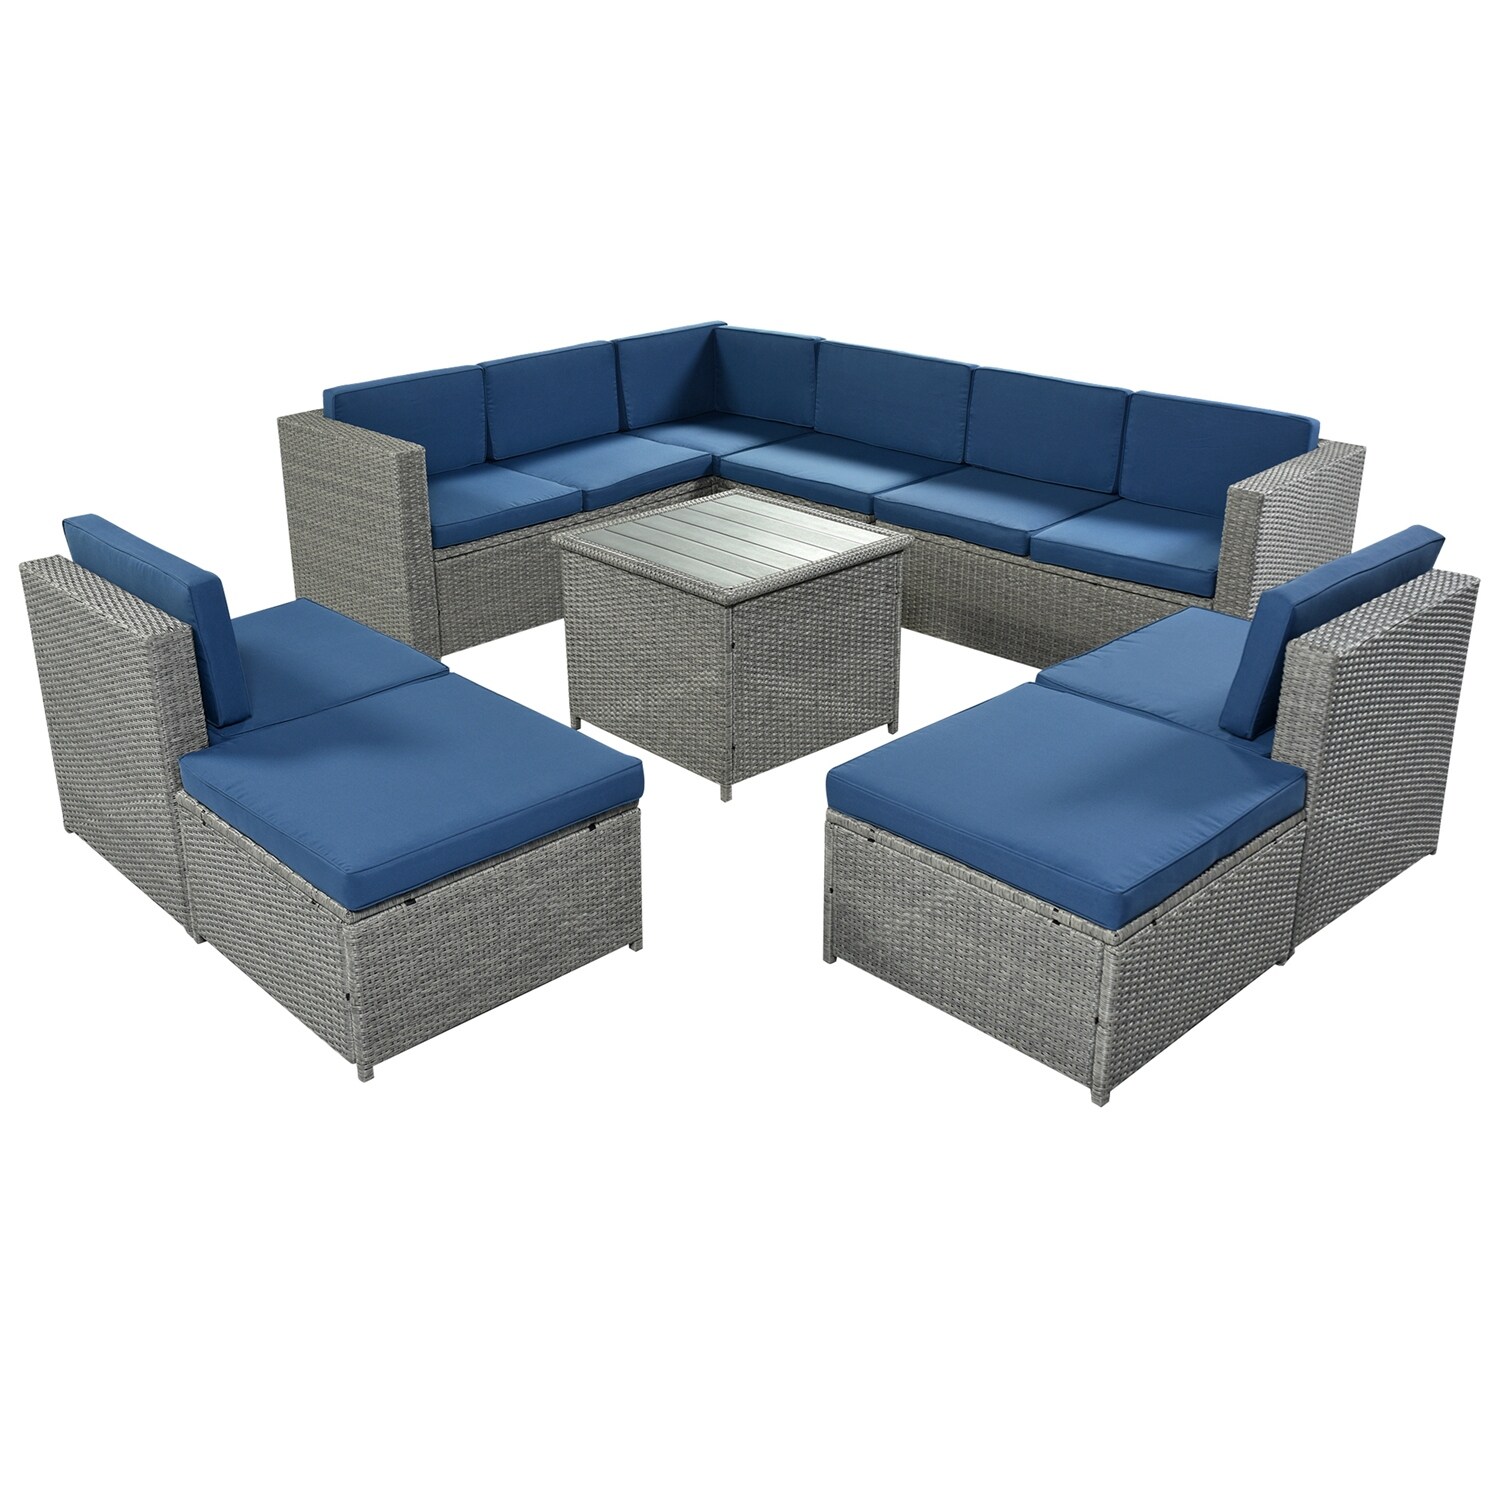 Topcraft 9 Piece Rattan Sectional Seating Group